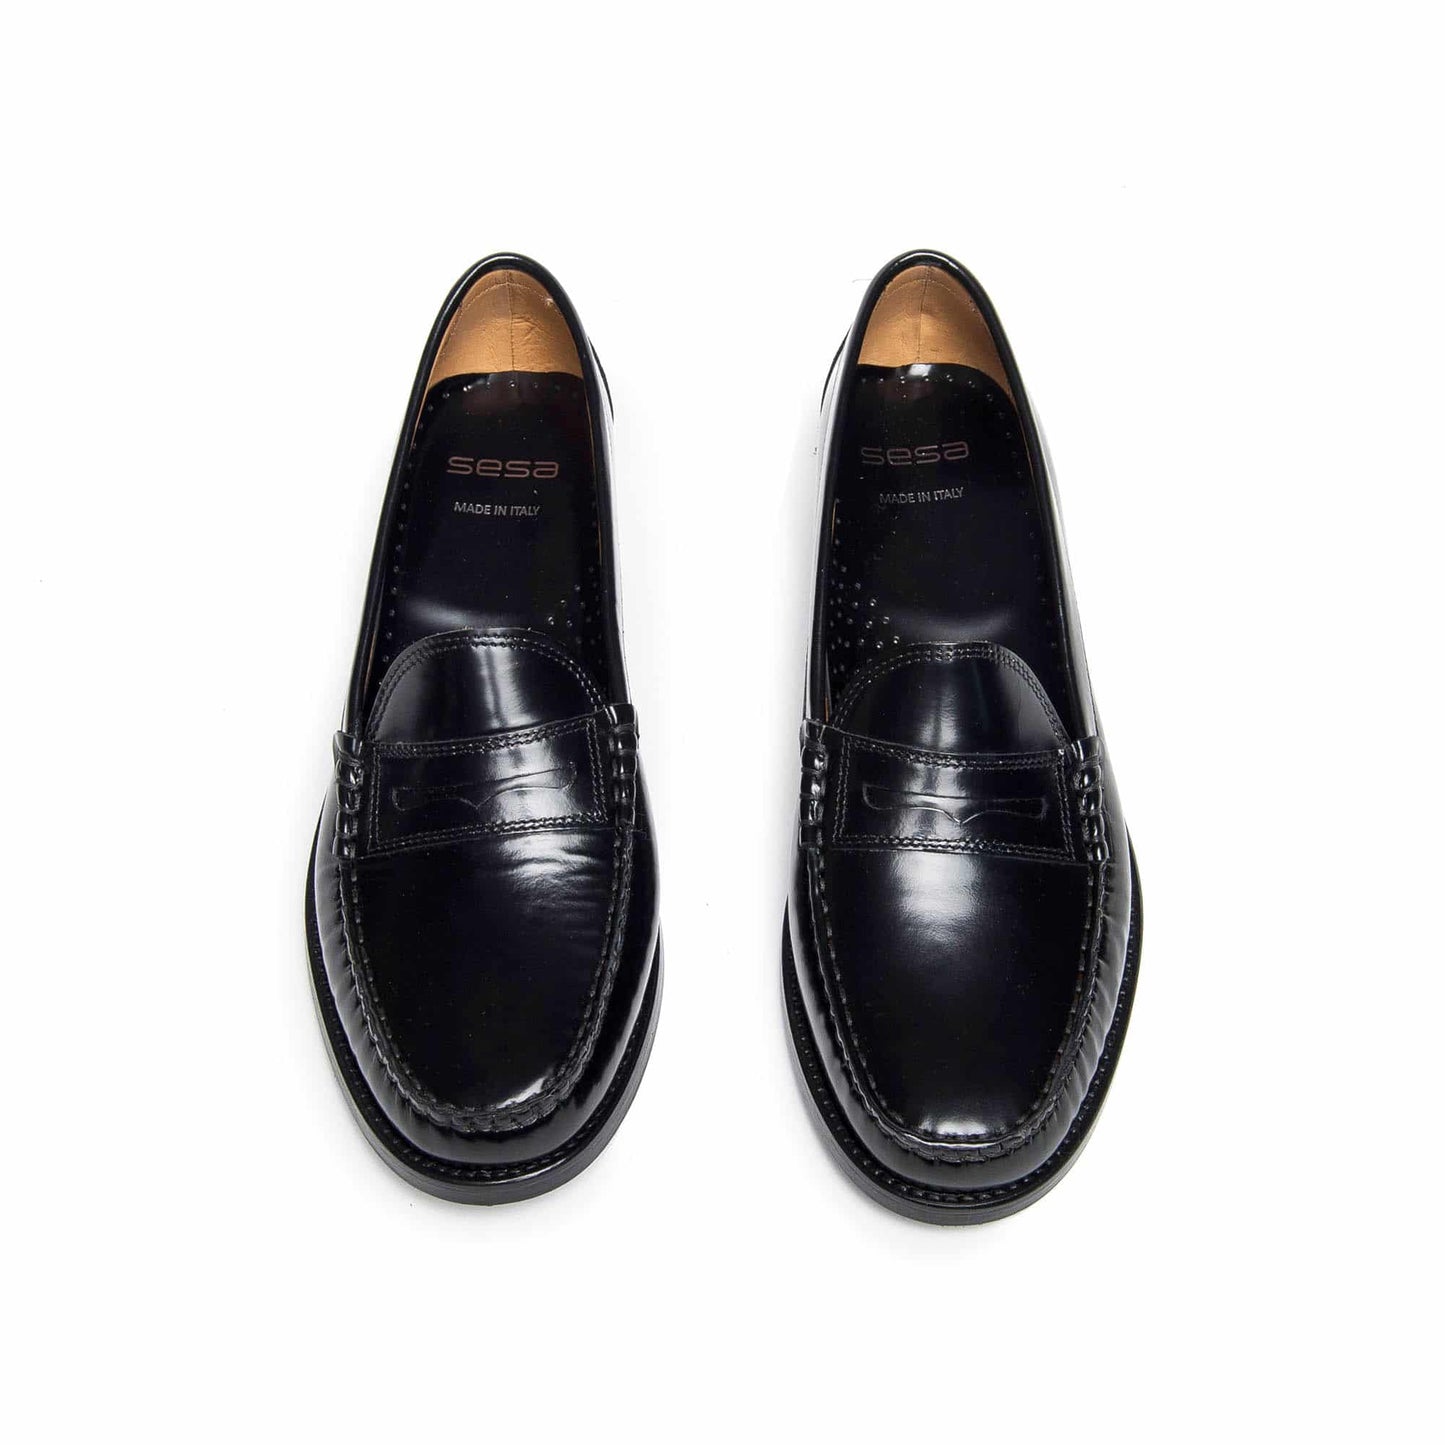 Black Penny Loafer - New York Licorice